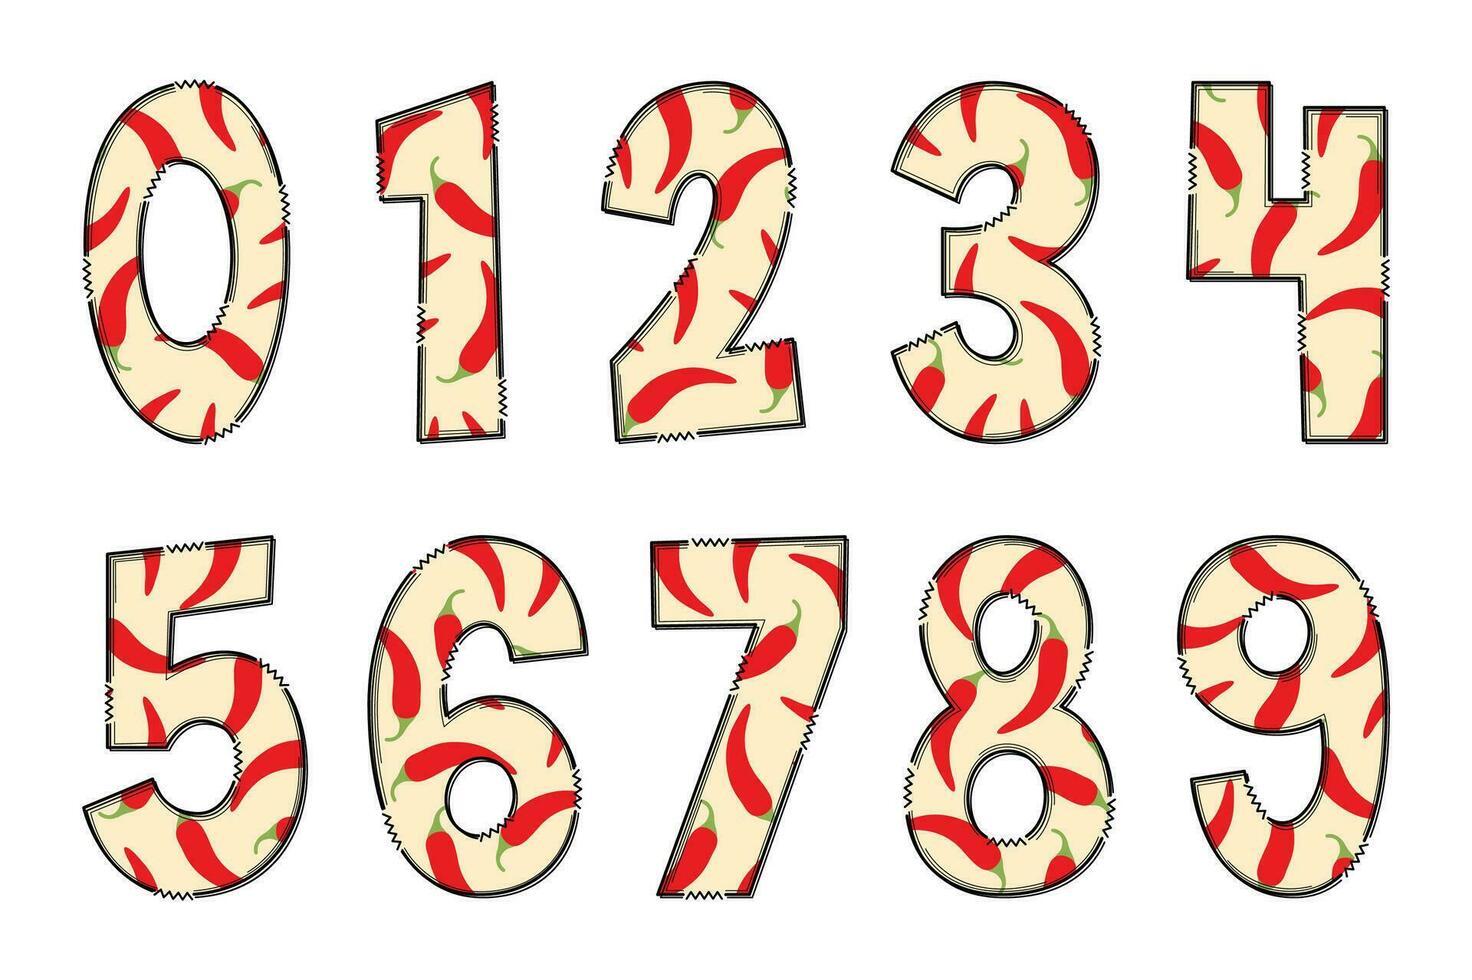 Adorable Handcrafted Chili Pepper Number Set vector